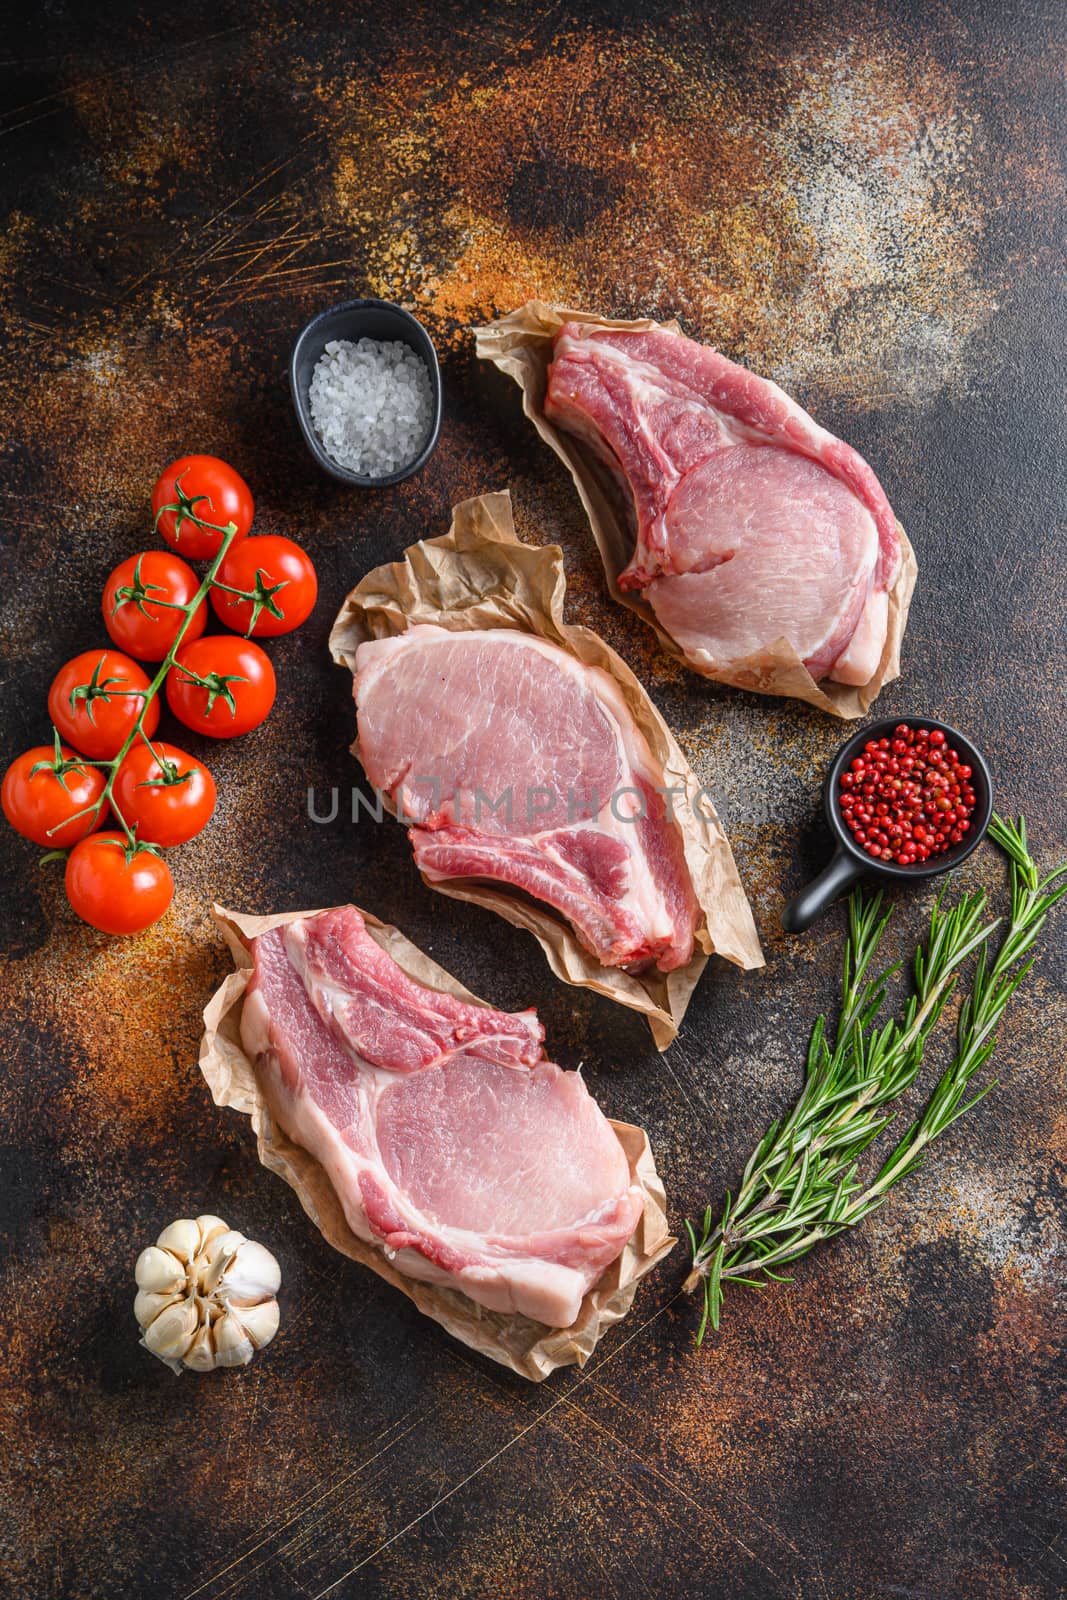 Raw pork meat from above on craft paper with ingredients for grill rosematy over rustic old metal background stock photo by Ilianesolenyi